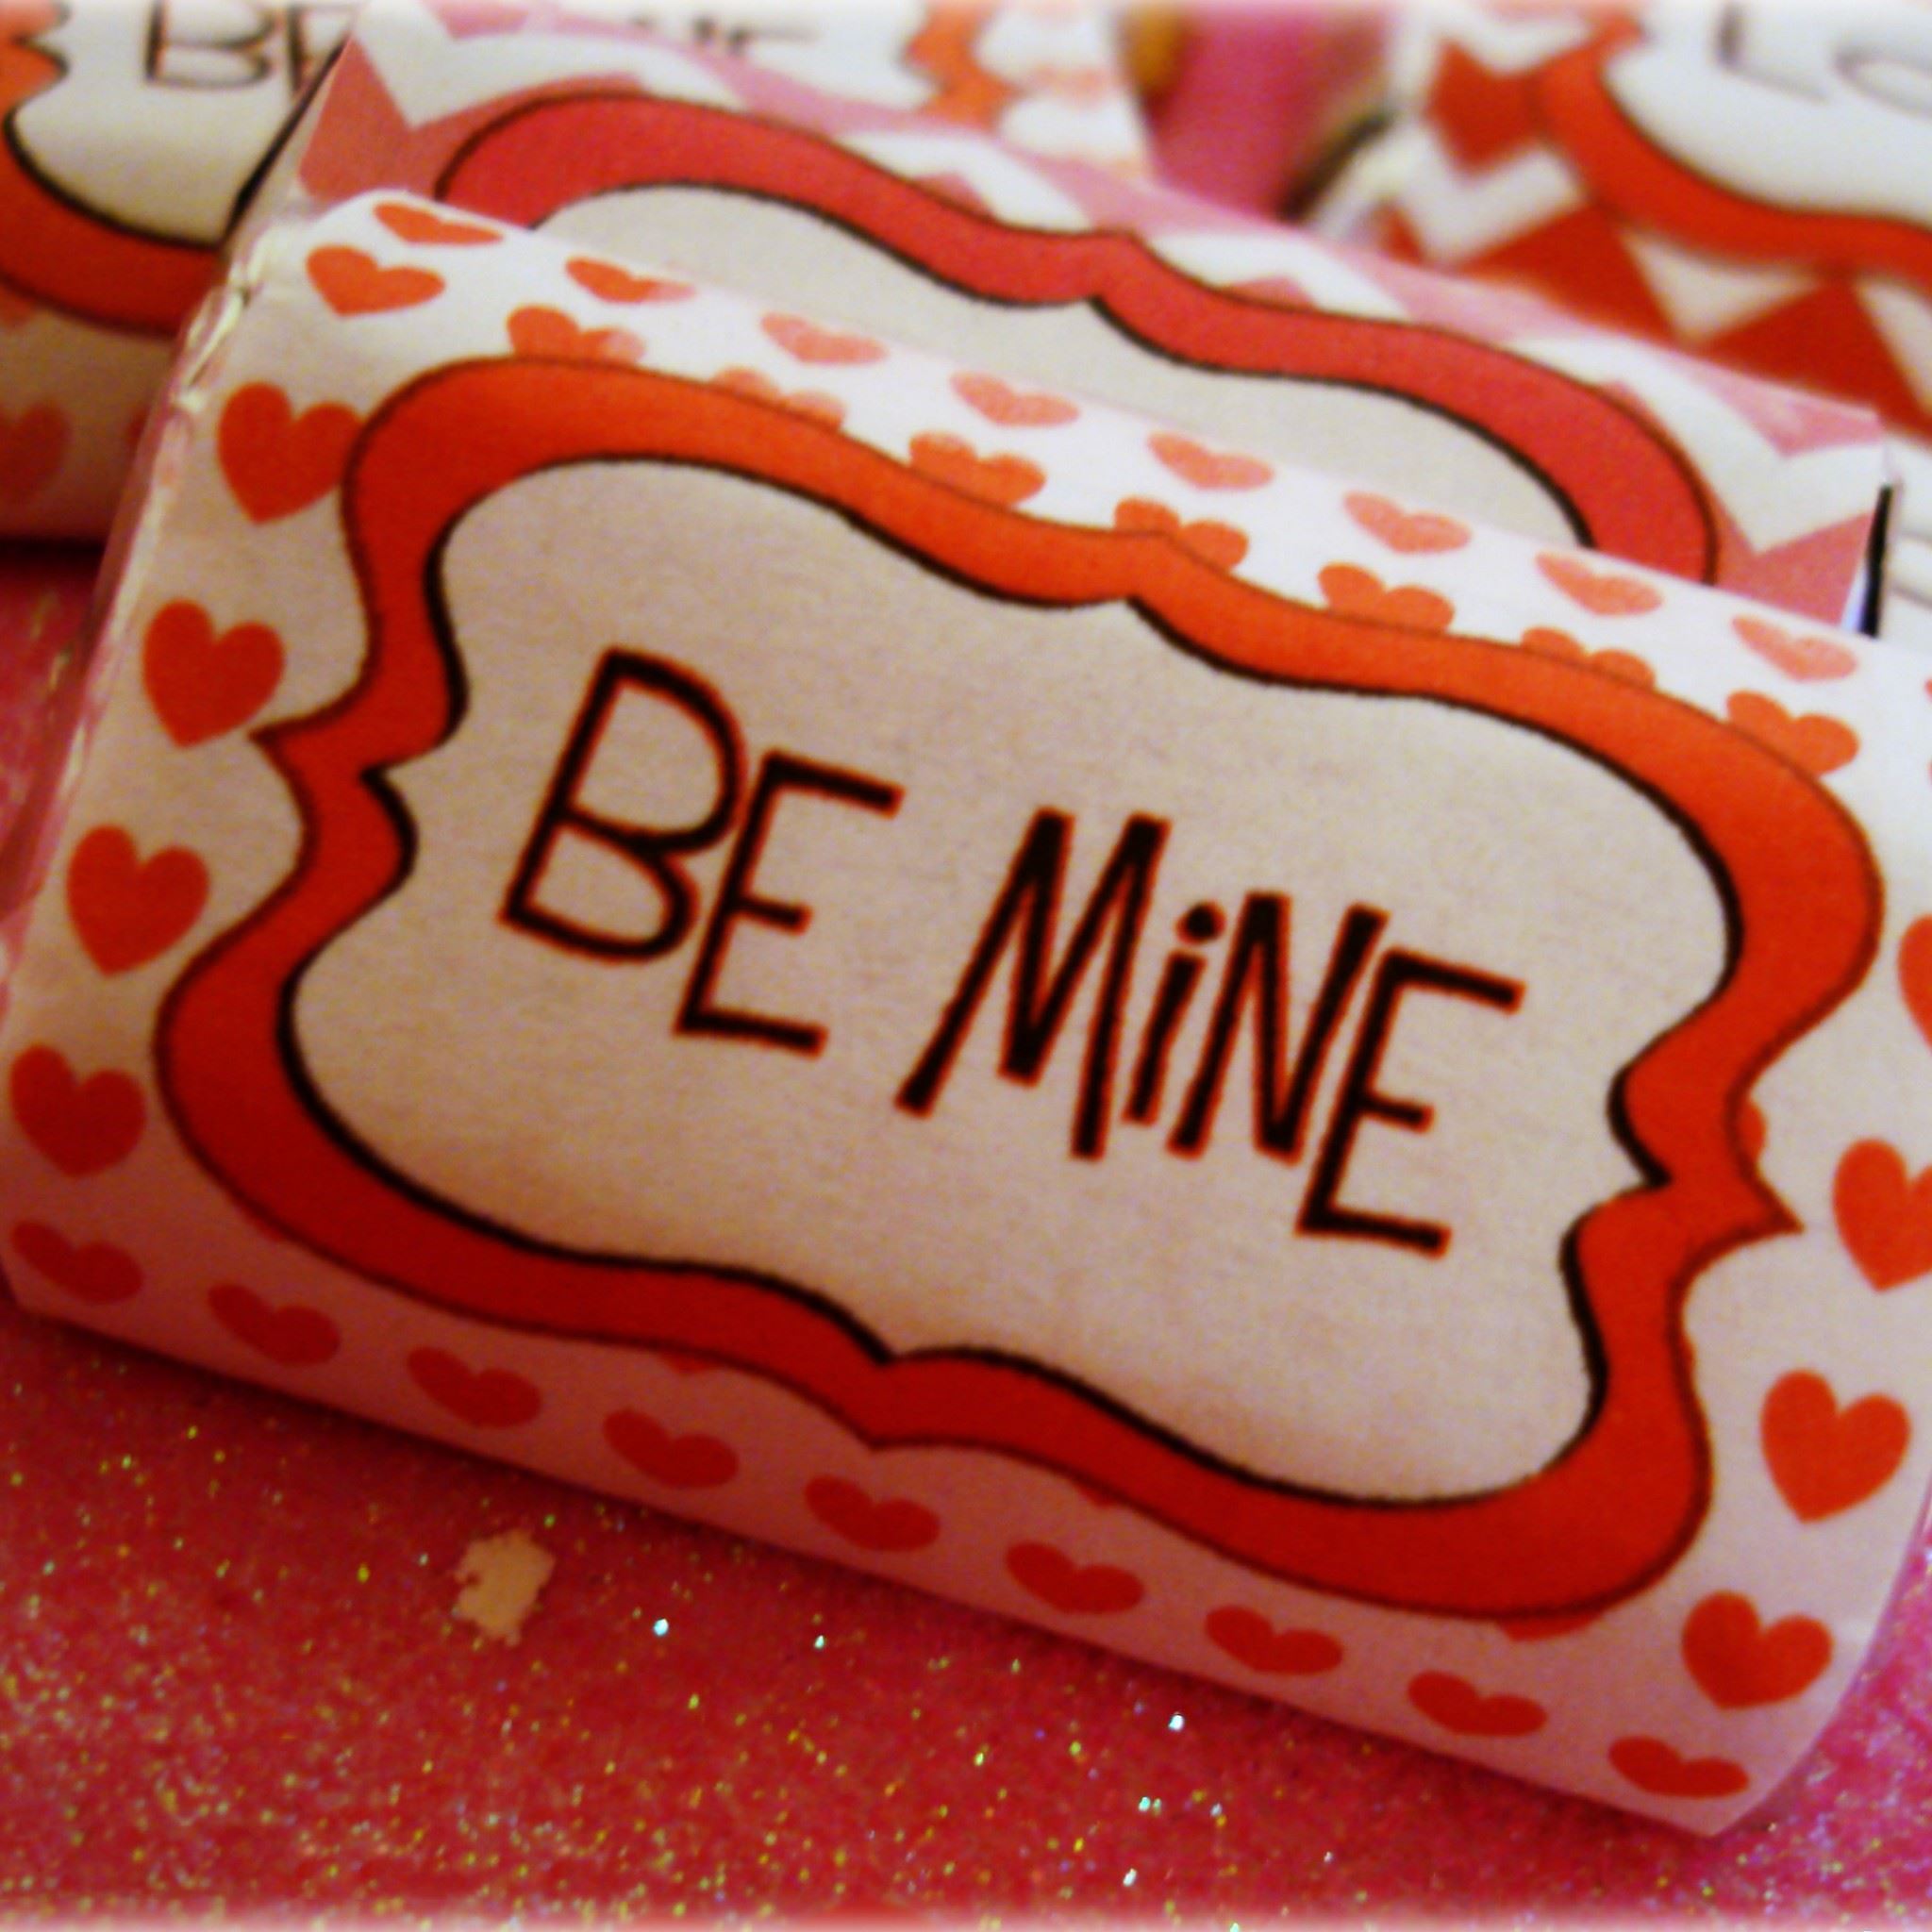 Valentines Day Candy Be Mine iPad Air wallpaper 